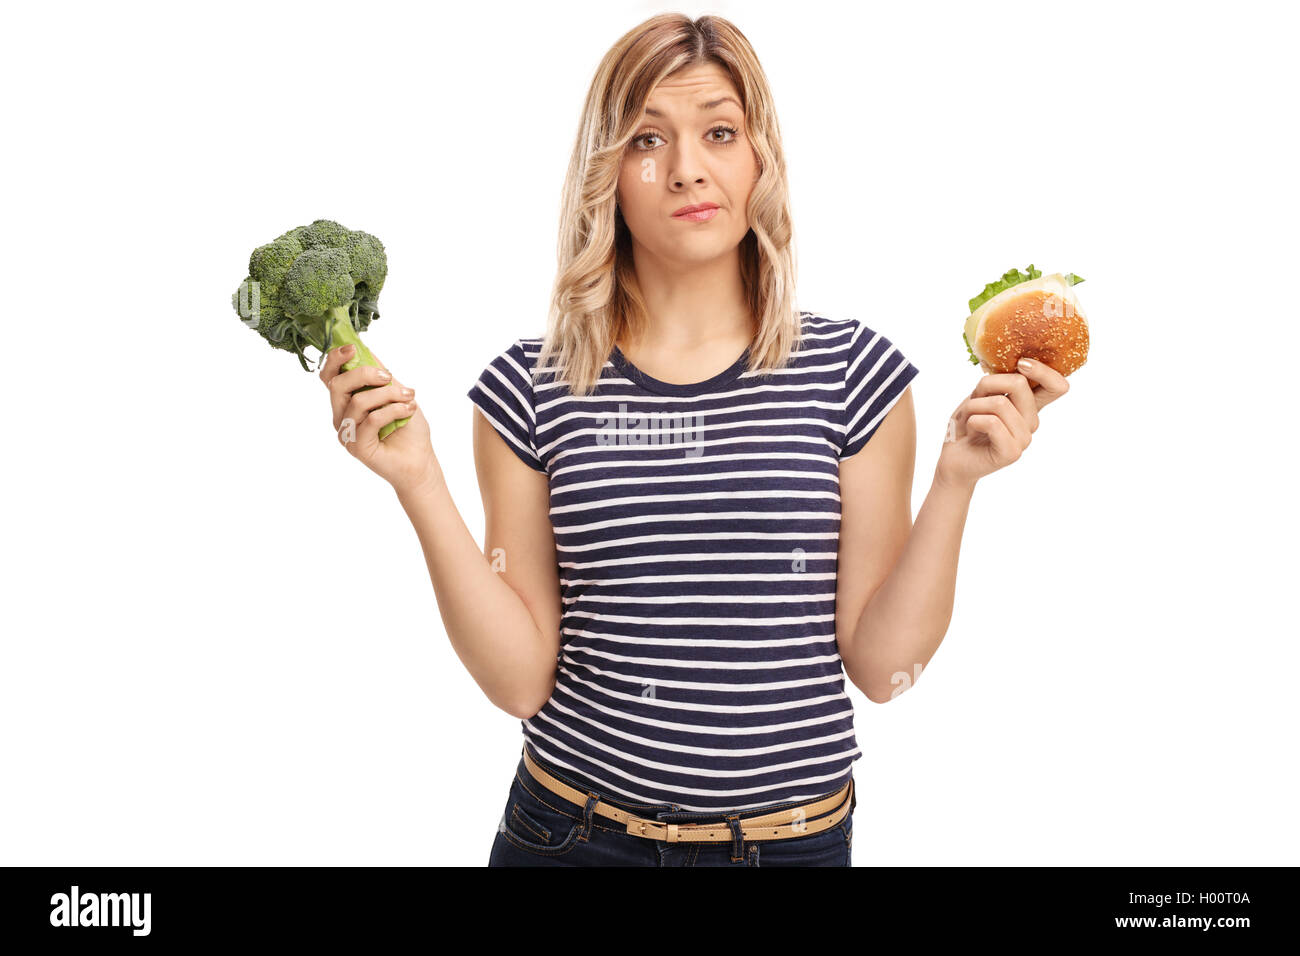 Sad woman holding a sandwich and broccoli isolated on white background Stock Photo